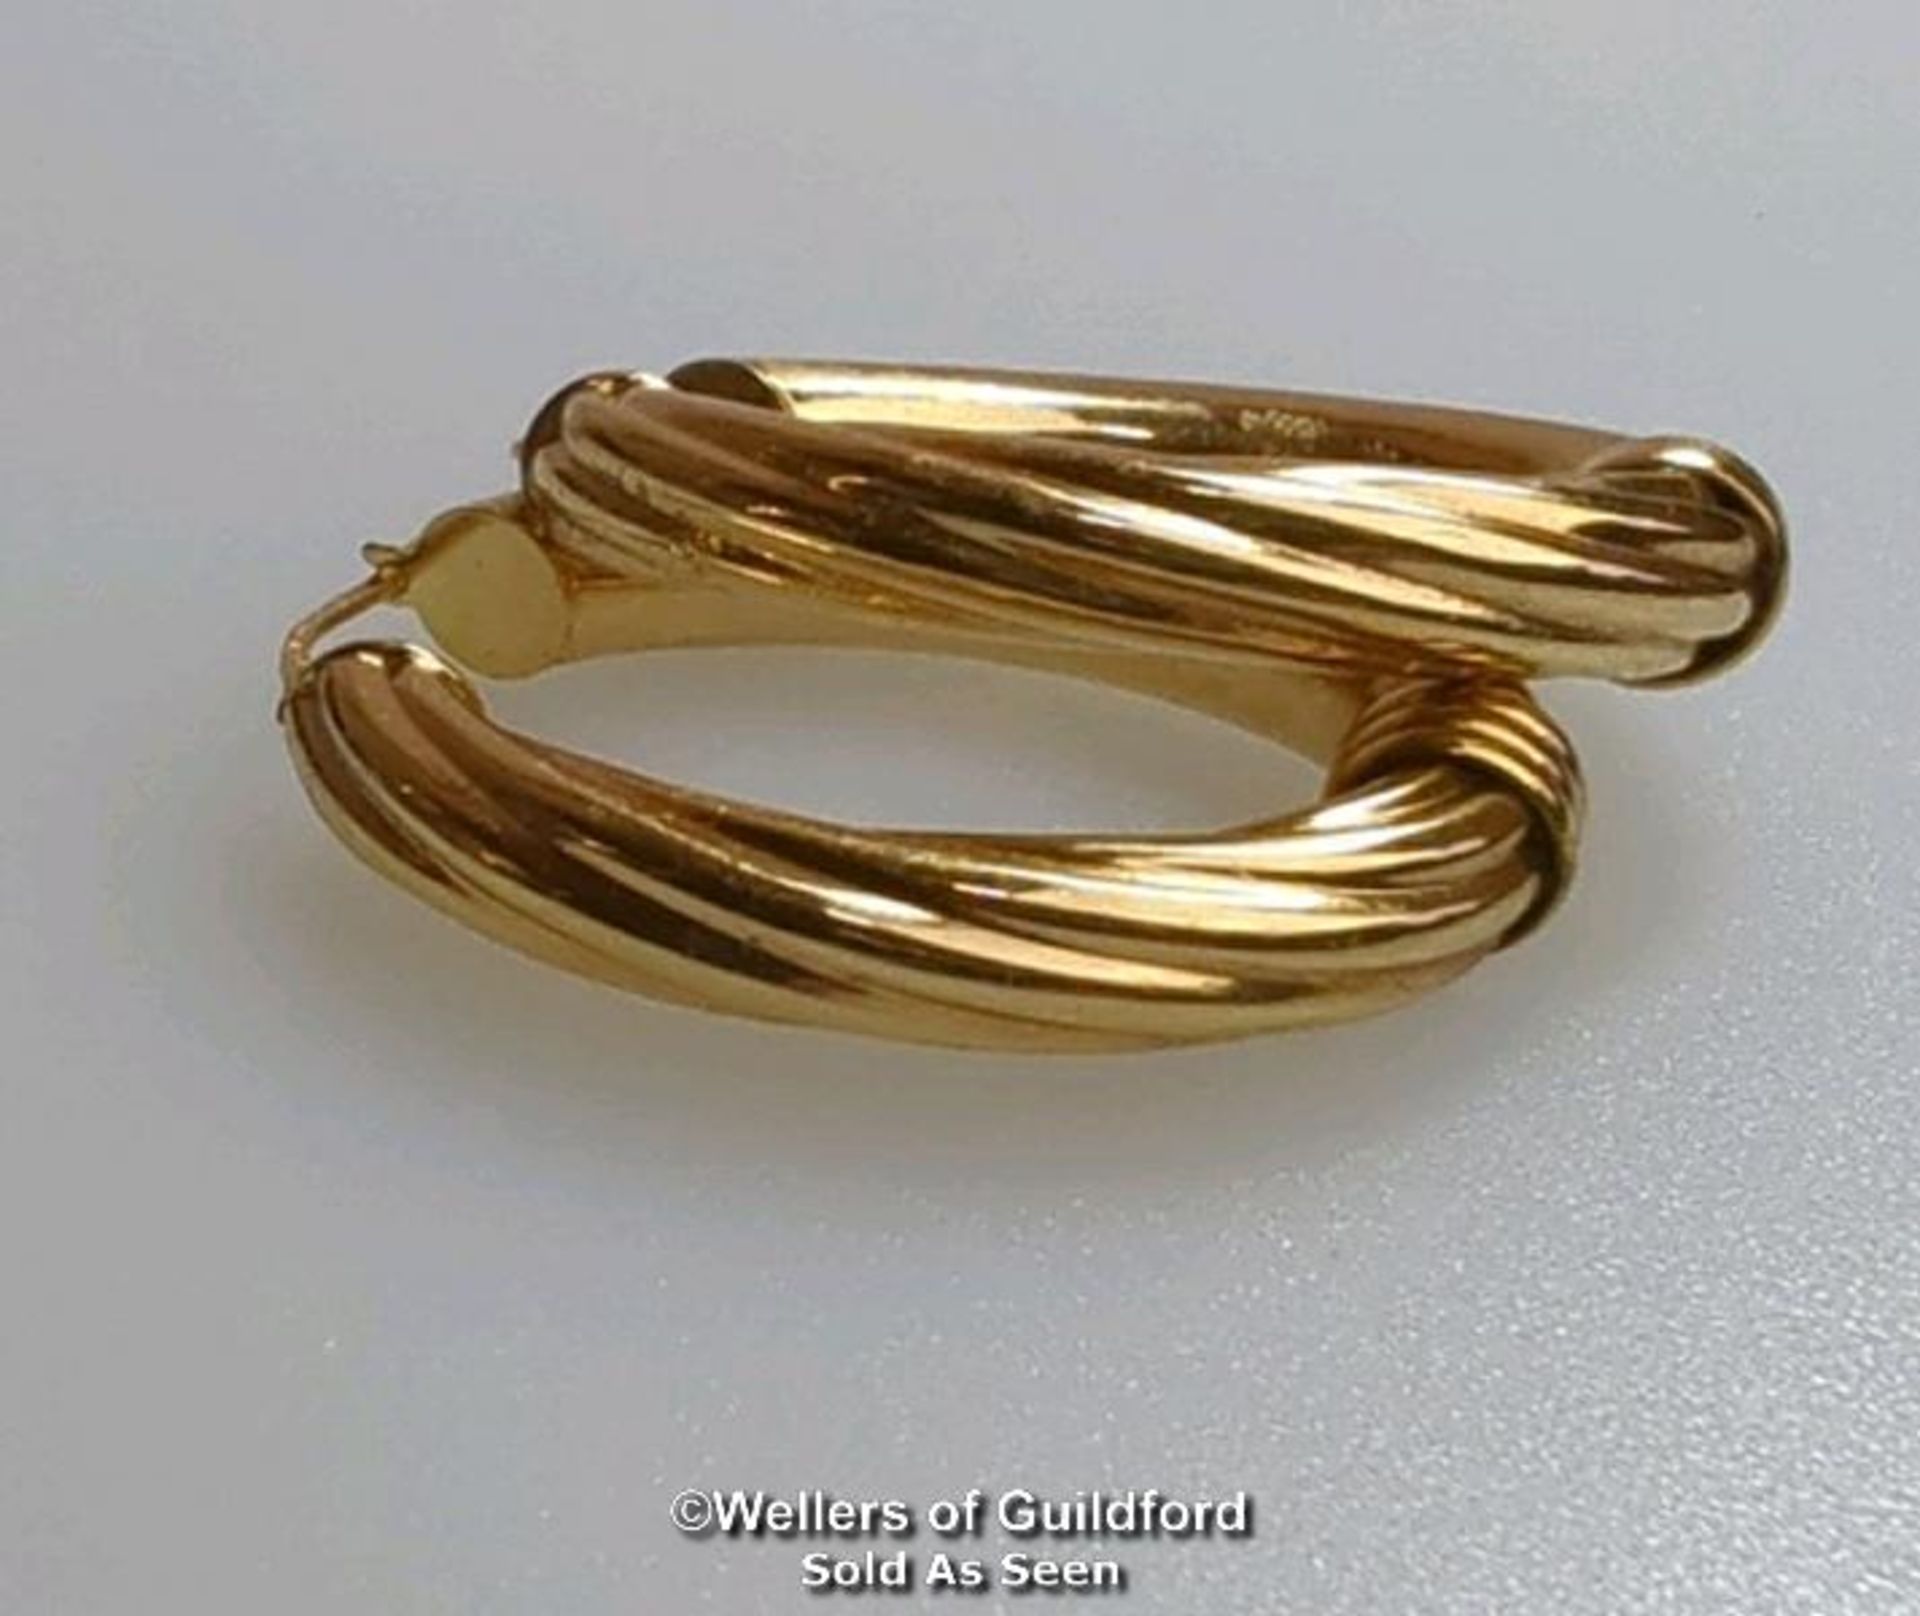 A pair of oval hoop earrings in hallmarked 9ct gold, length 4cm, gross weight 6.83g - Image 3 of 4